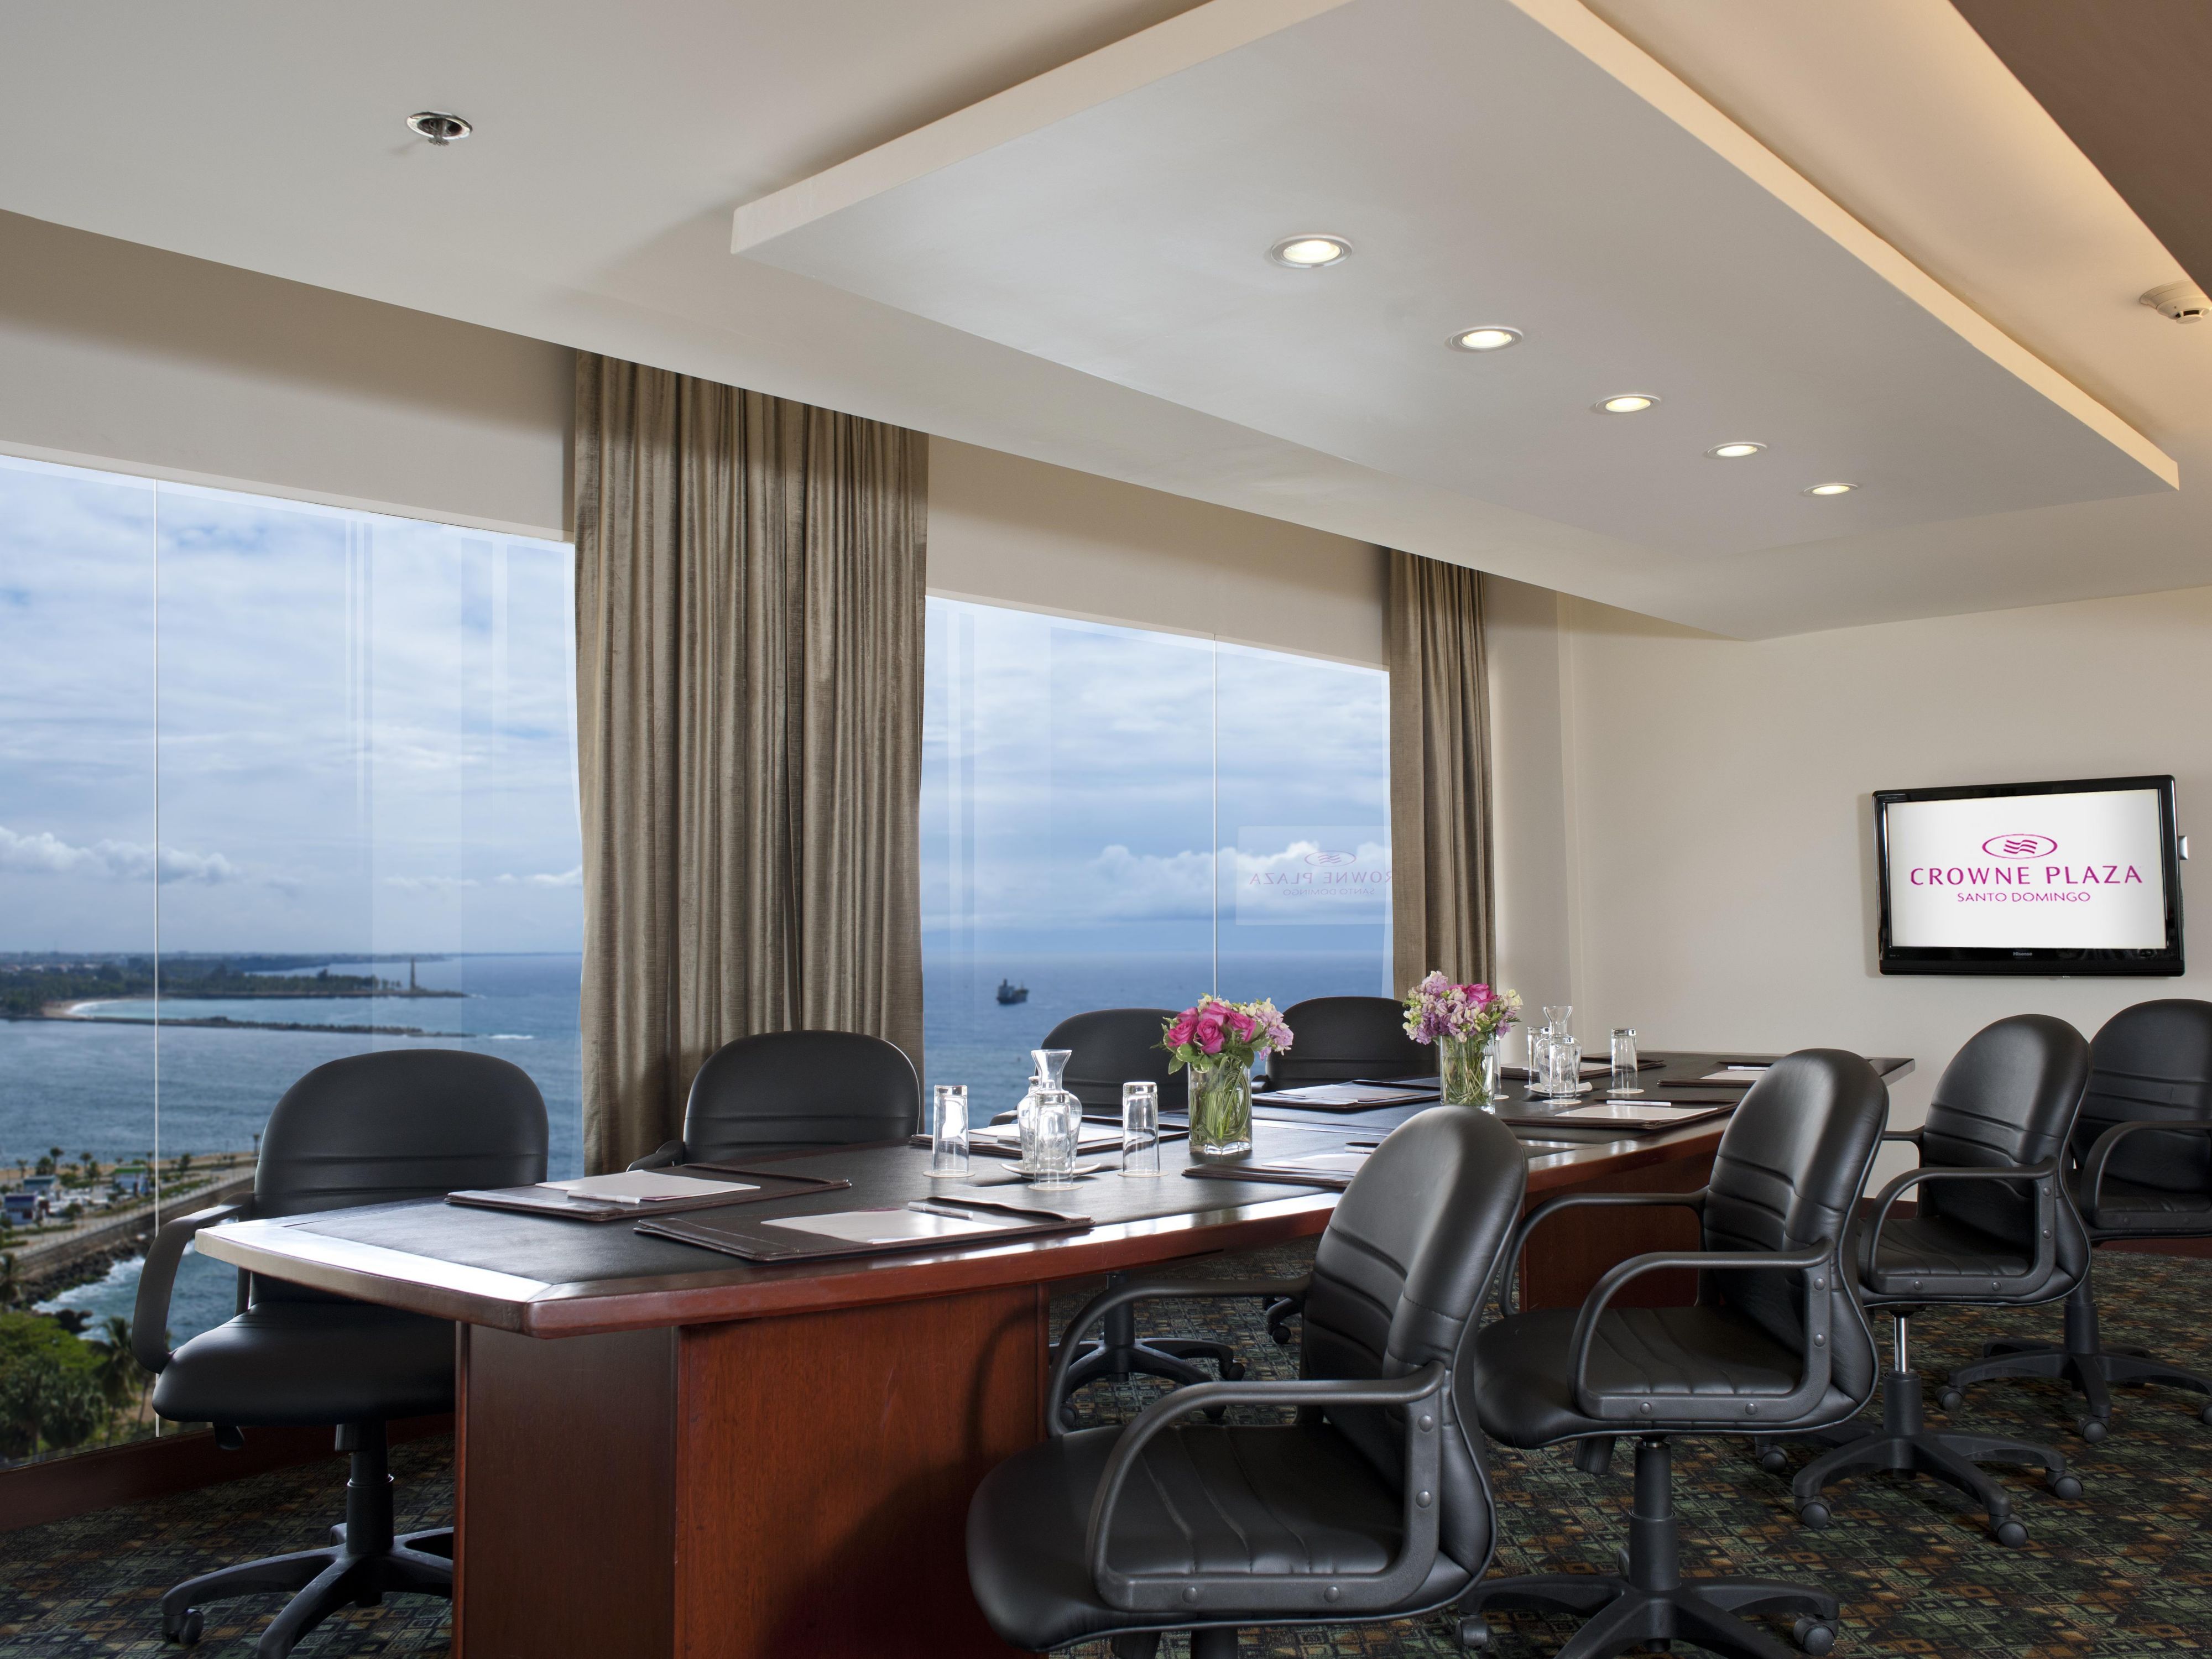 With 15 versatile meeting venues for up to 1,200 guests, our Santo Domingo hotel is the ideal destination for your conference, seminar, and celebration. Plan your events in 33,000 square feet of elegant and flexible meeting space with gorgeous sea views and catering services in a captivating destination.
